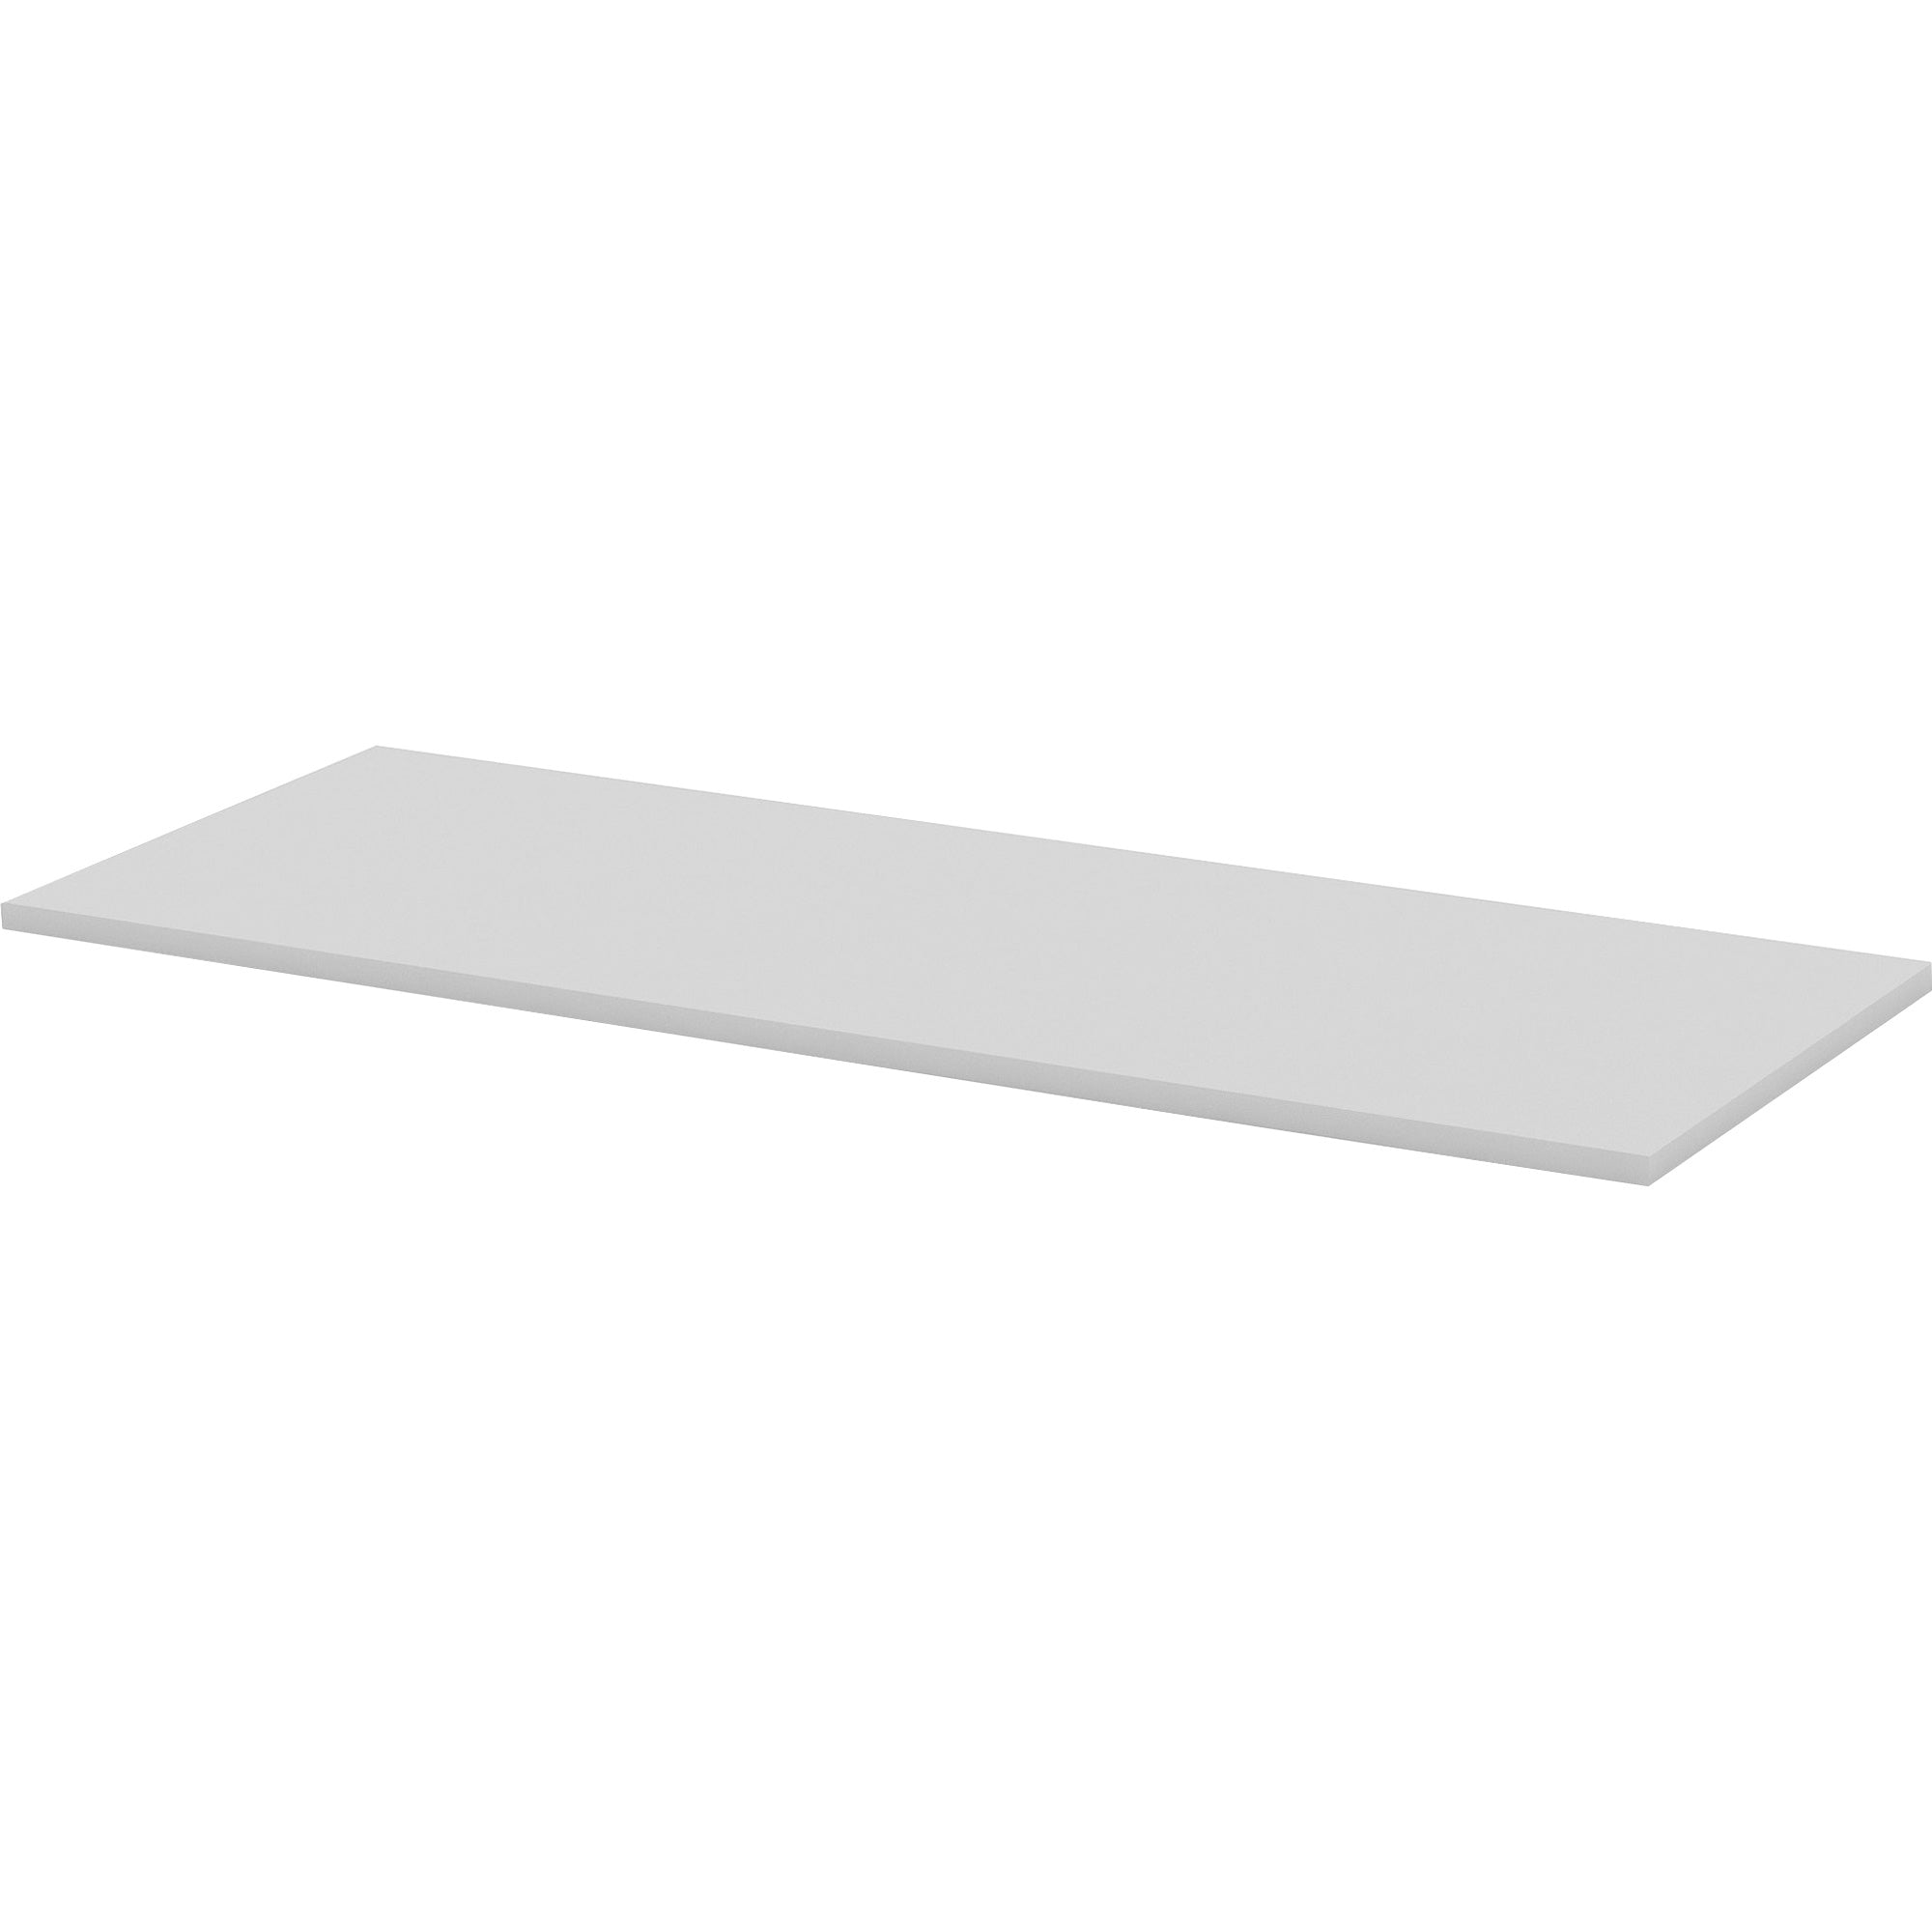 lorell-training-tabletop-for-table-topgray-rectangle-top-60-table-top-length-x-24-table-top-width-x-1-table-top-thickness-assembly-required-1-each_llr62596 - 1